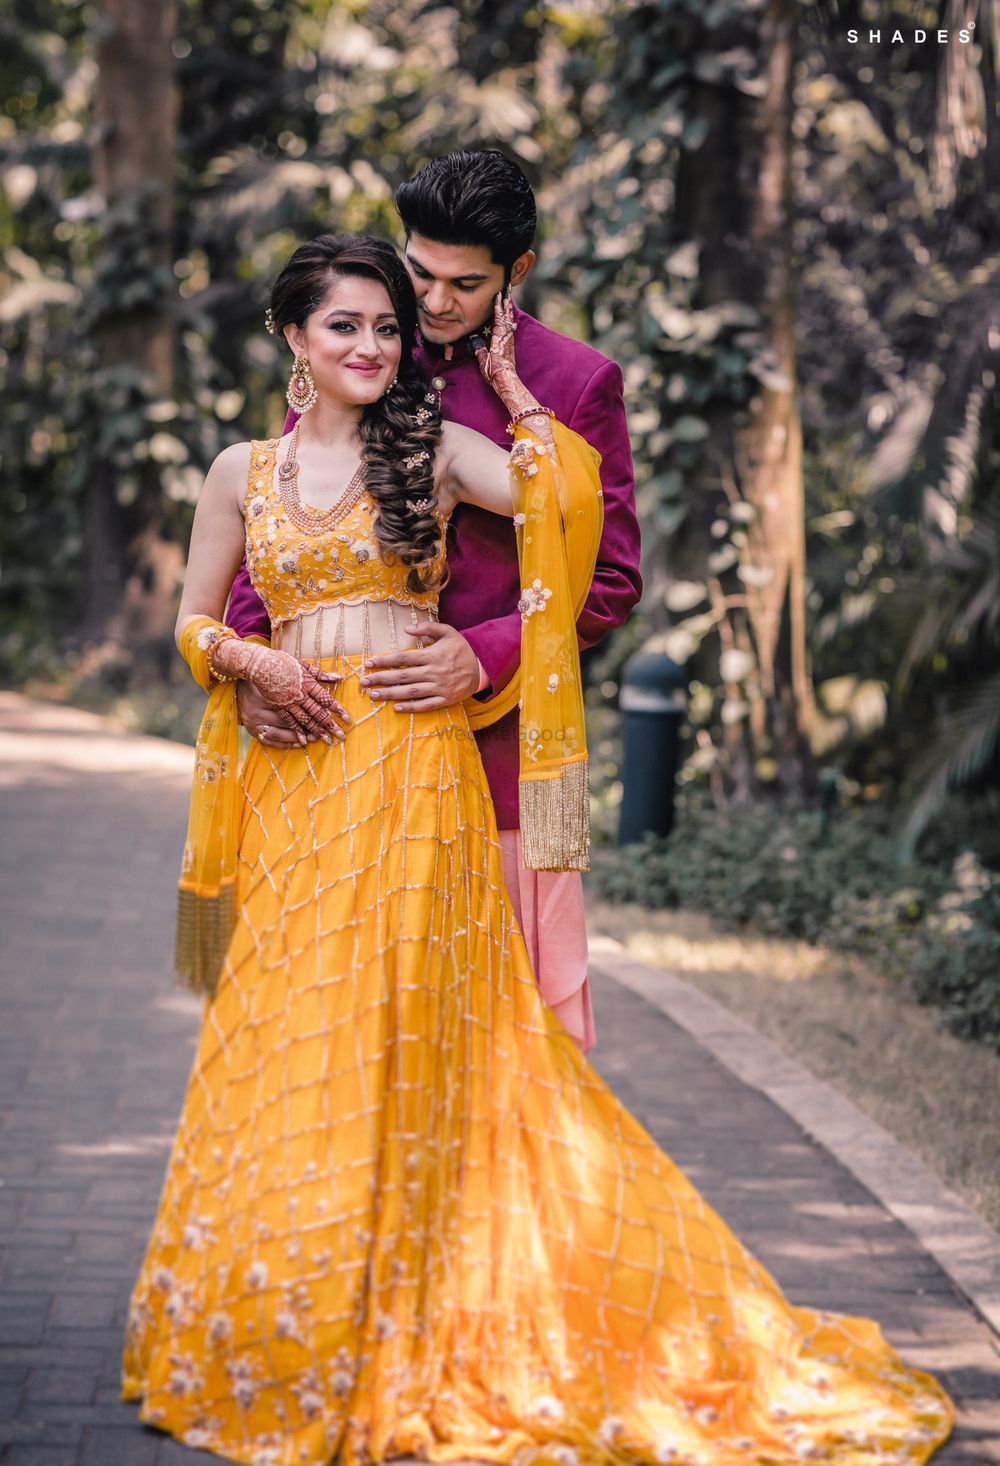 Photo of Bride and groom mehendi outfits